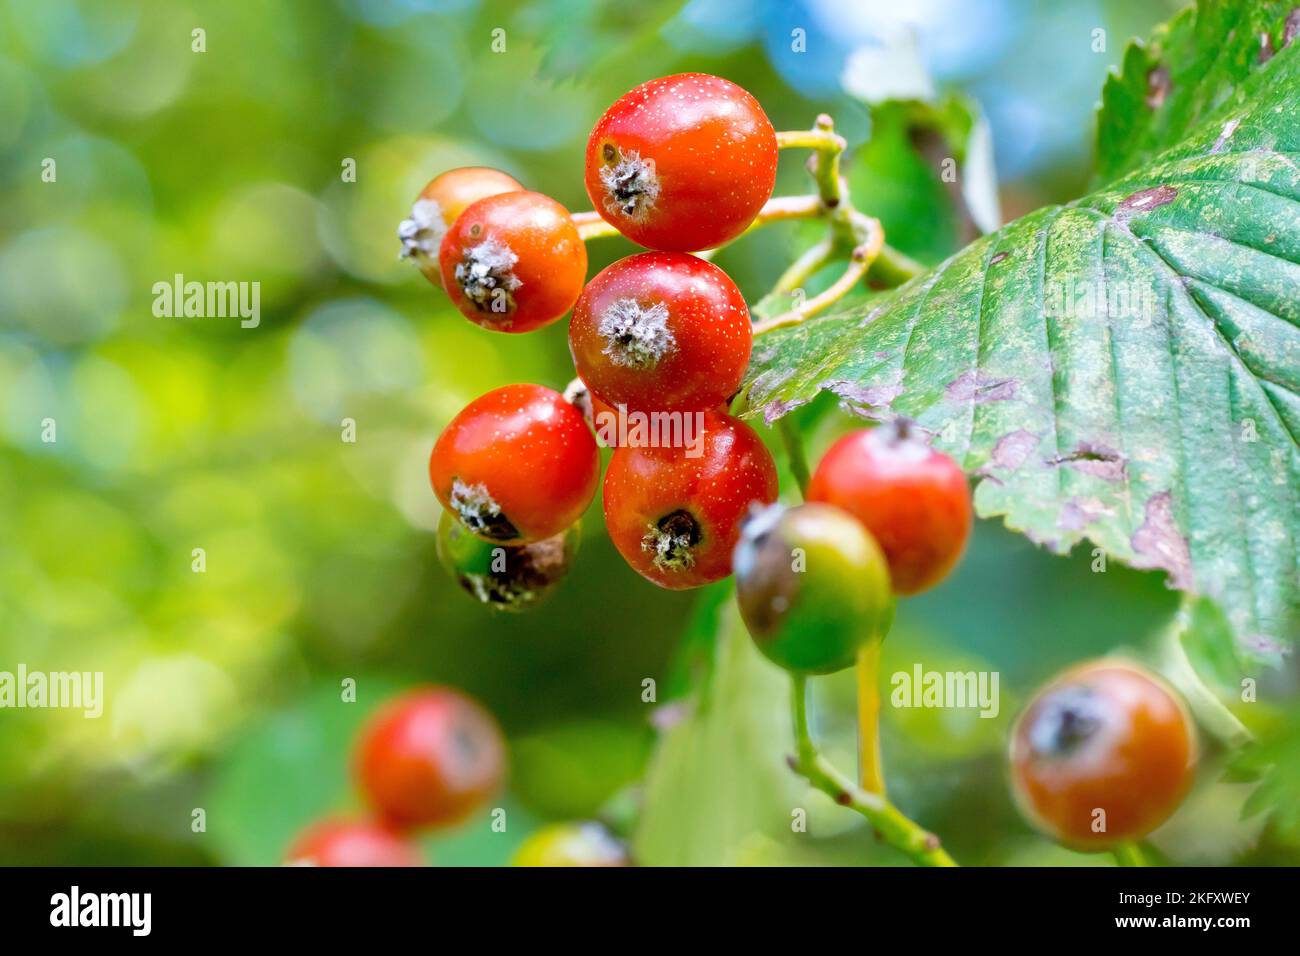 White Beam or Whitebeam (sorbus aria agg.), close up of a small cluster of the red berries the tree produces in abundance in the autumn. Stock Photo